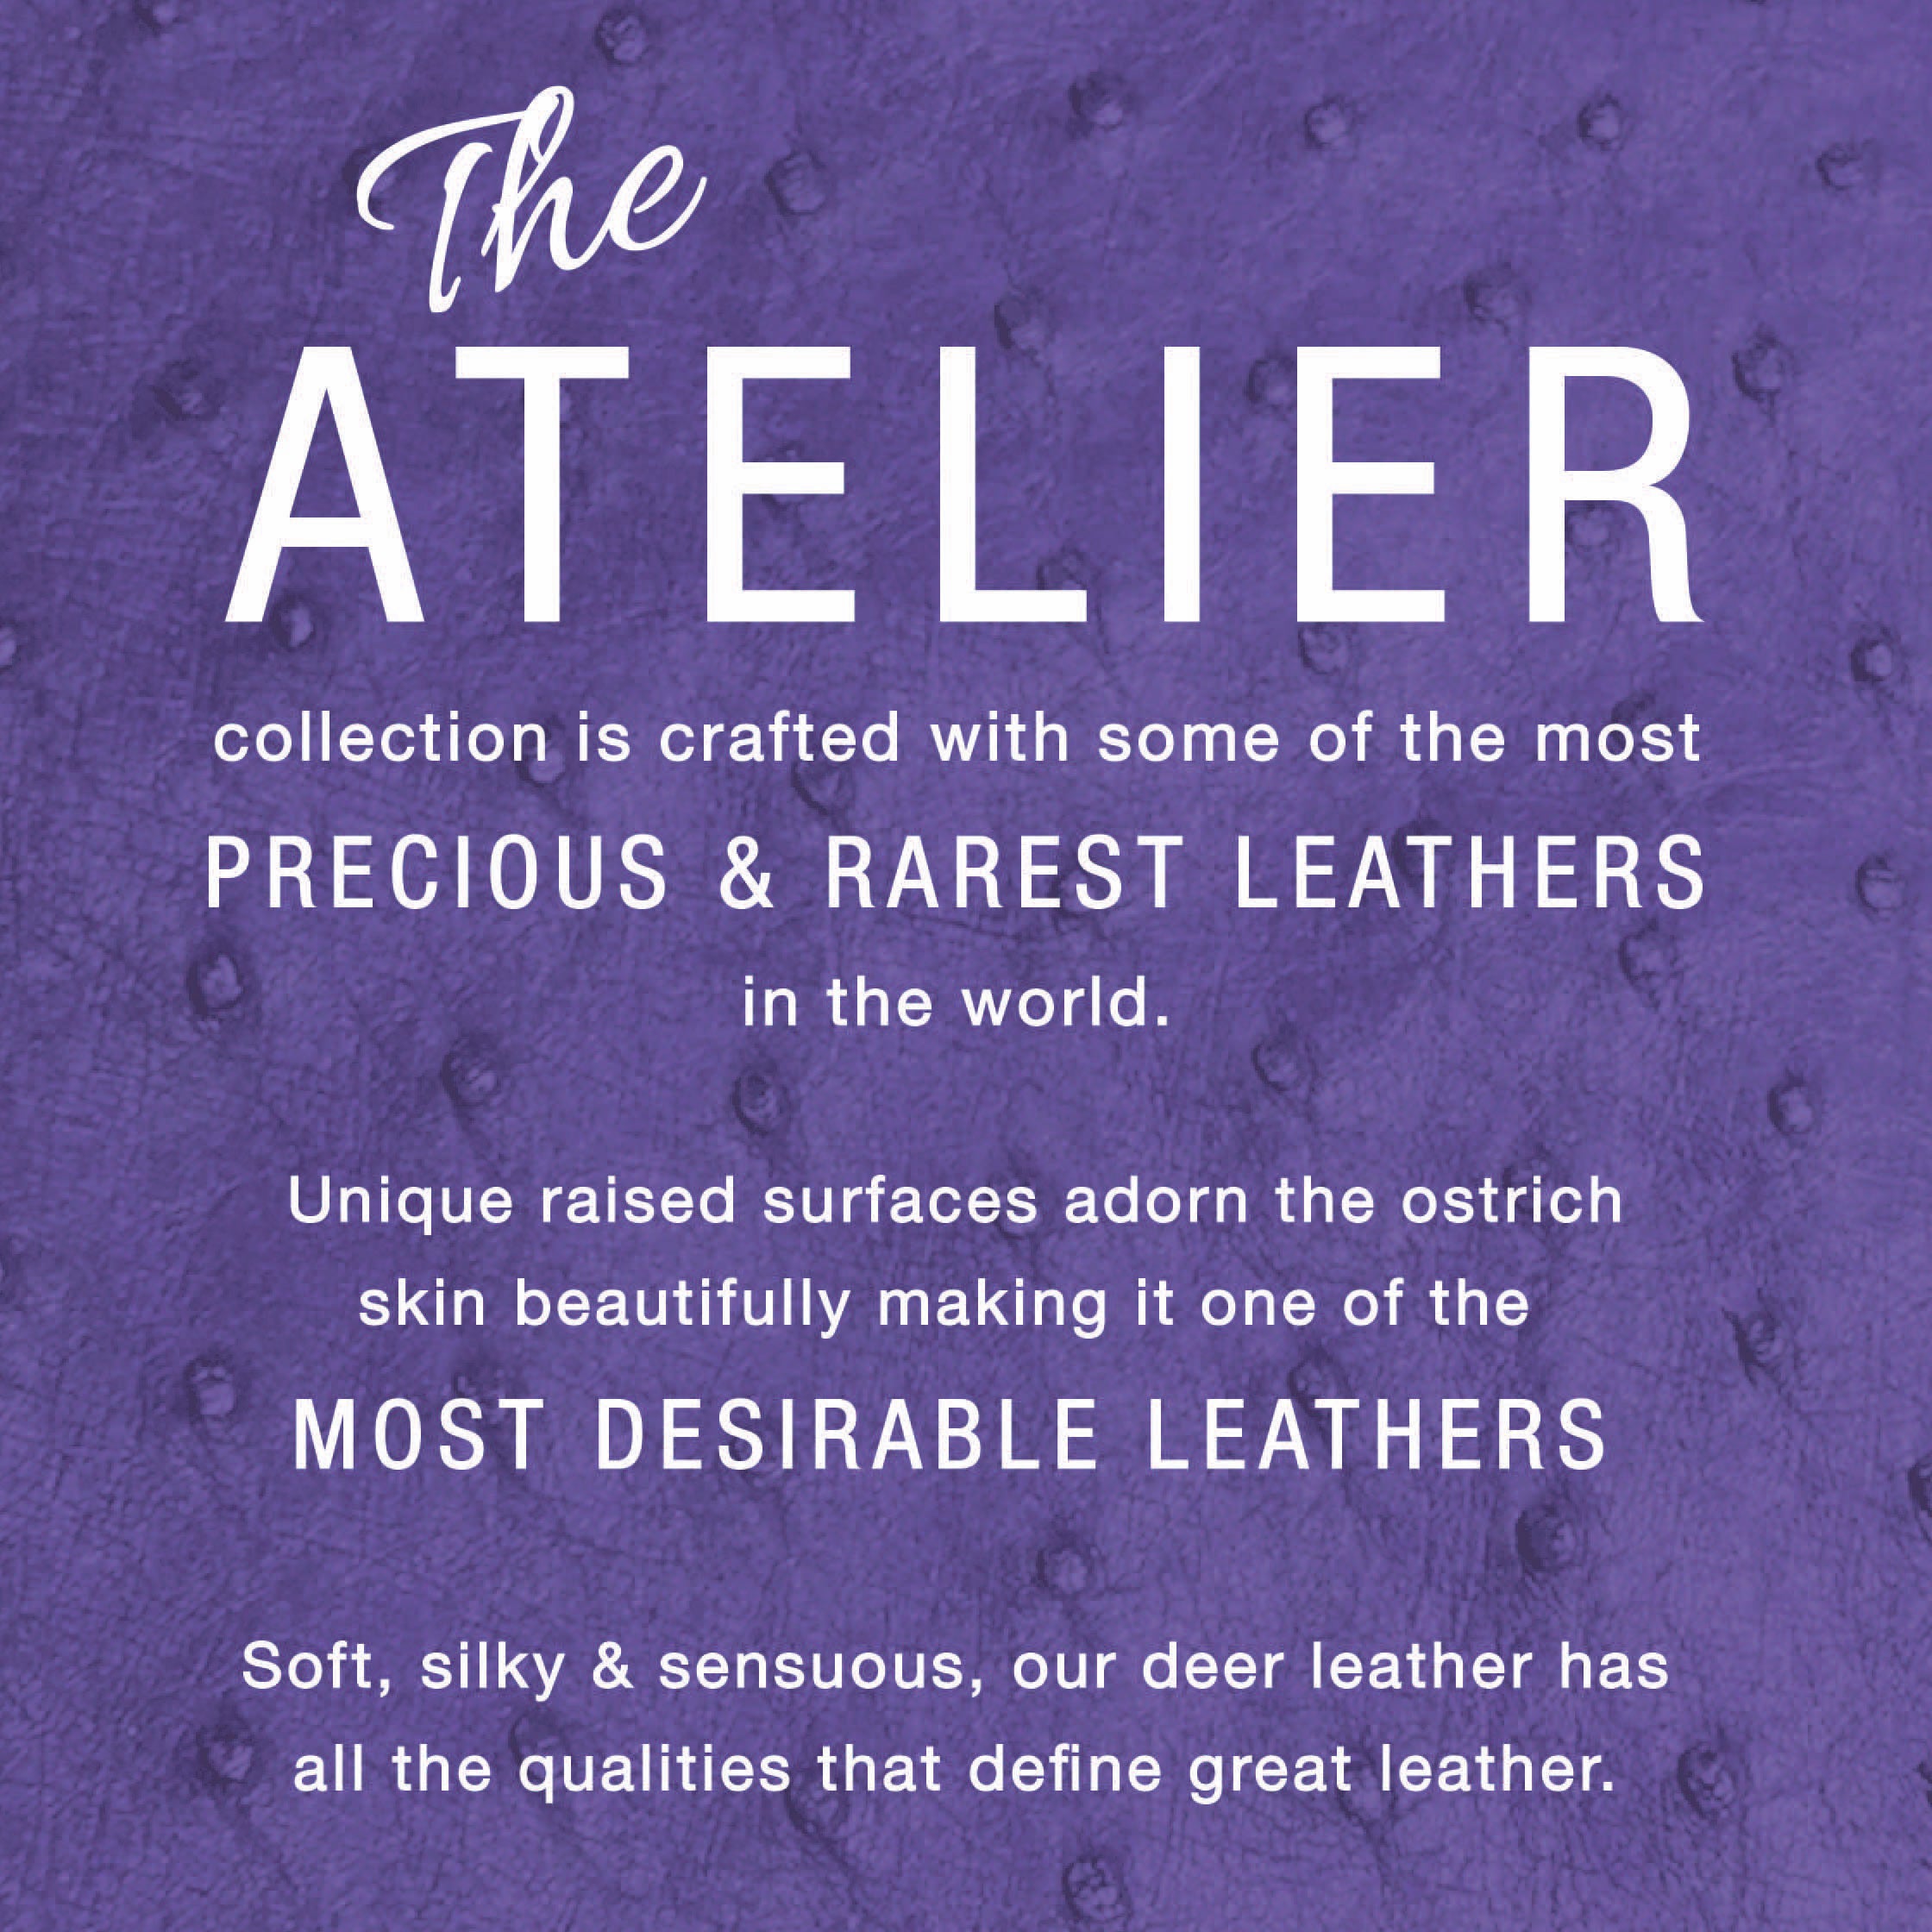 HIDESIGN - The sheer luxury of our Atelier collection is